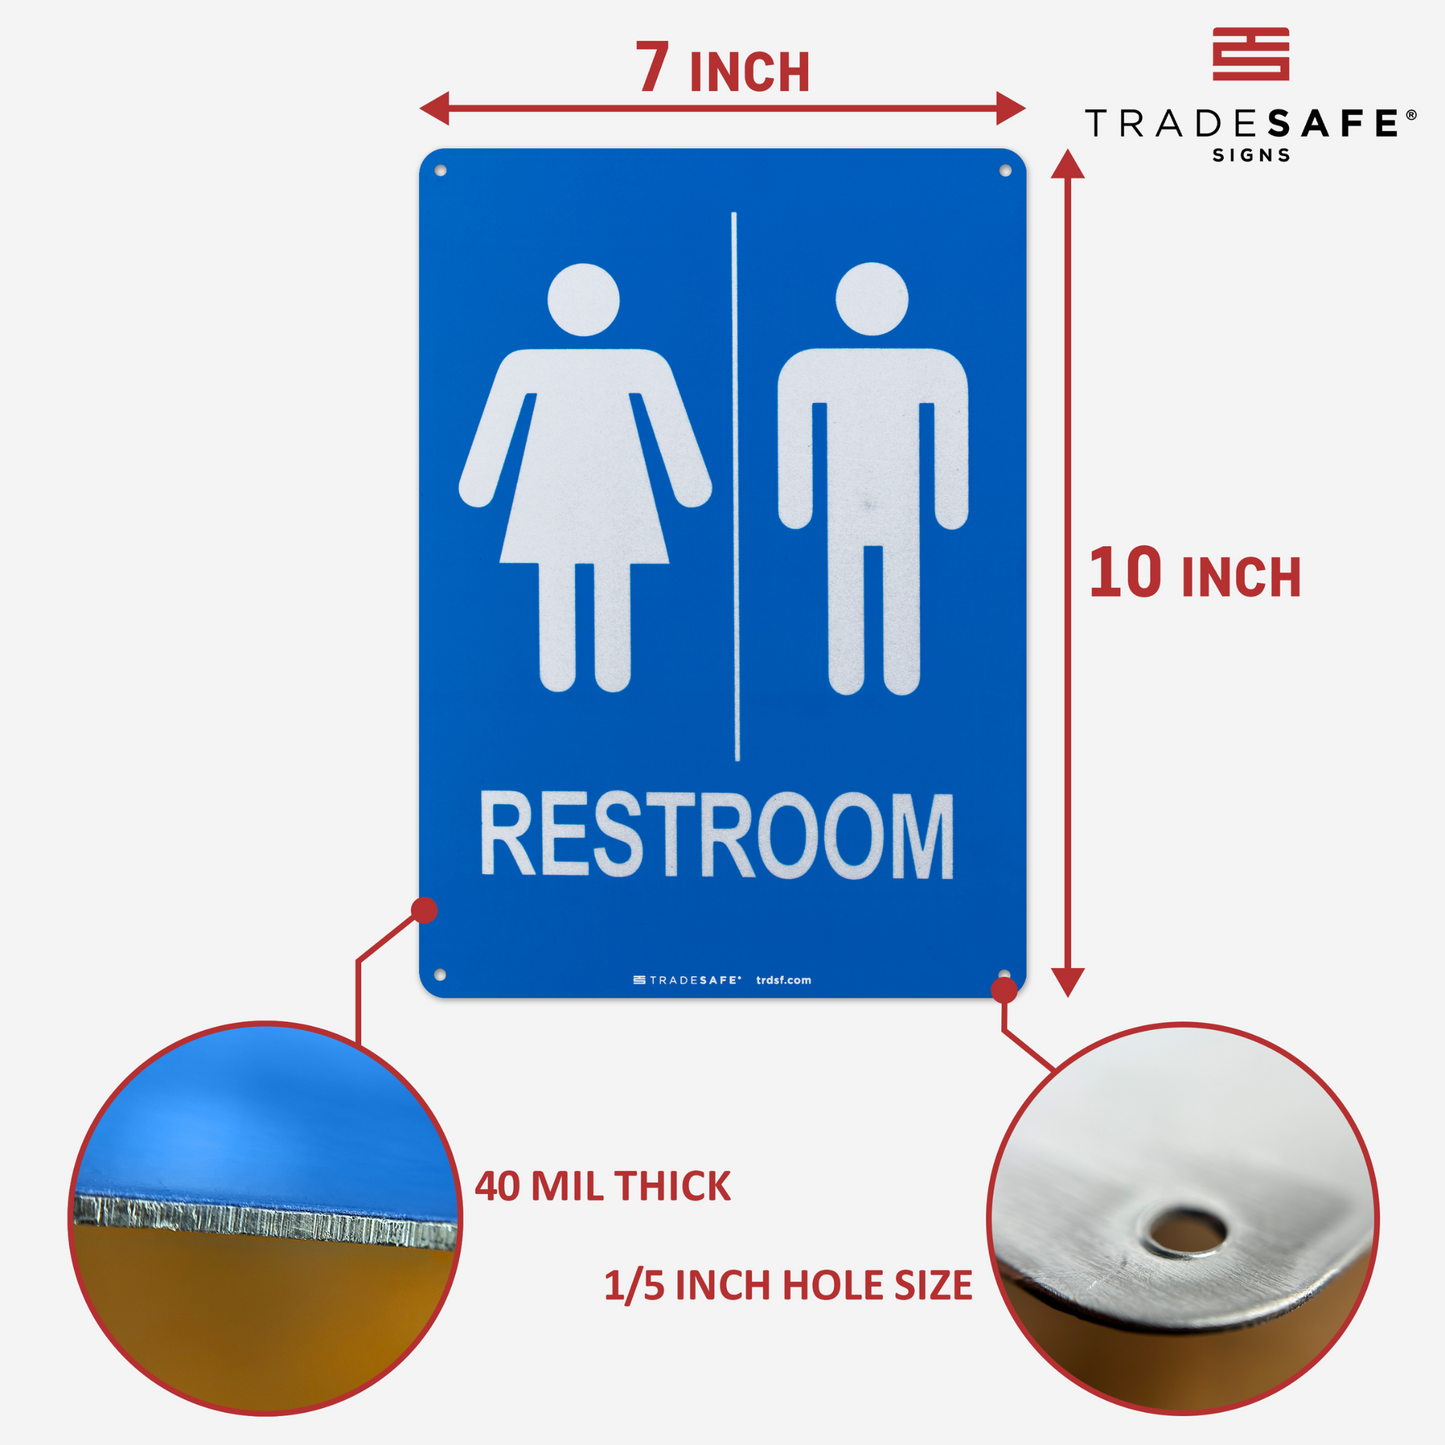 dimensions of unisex restroom sign